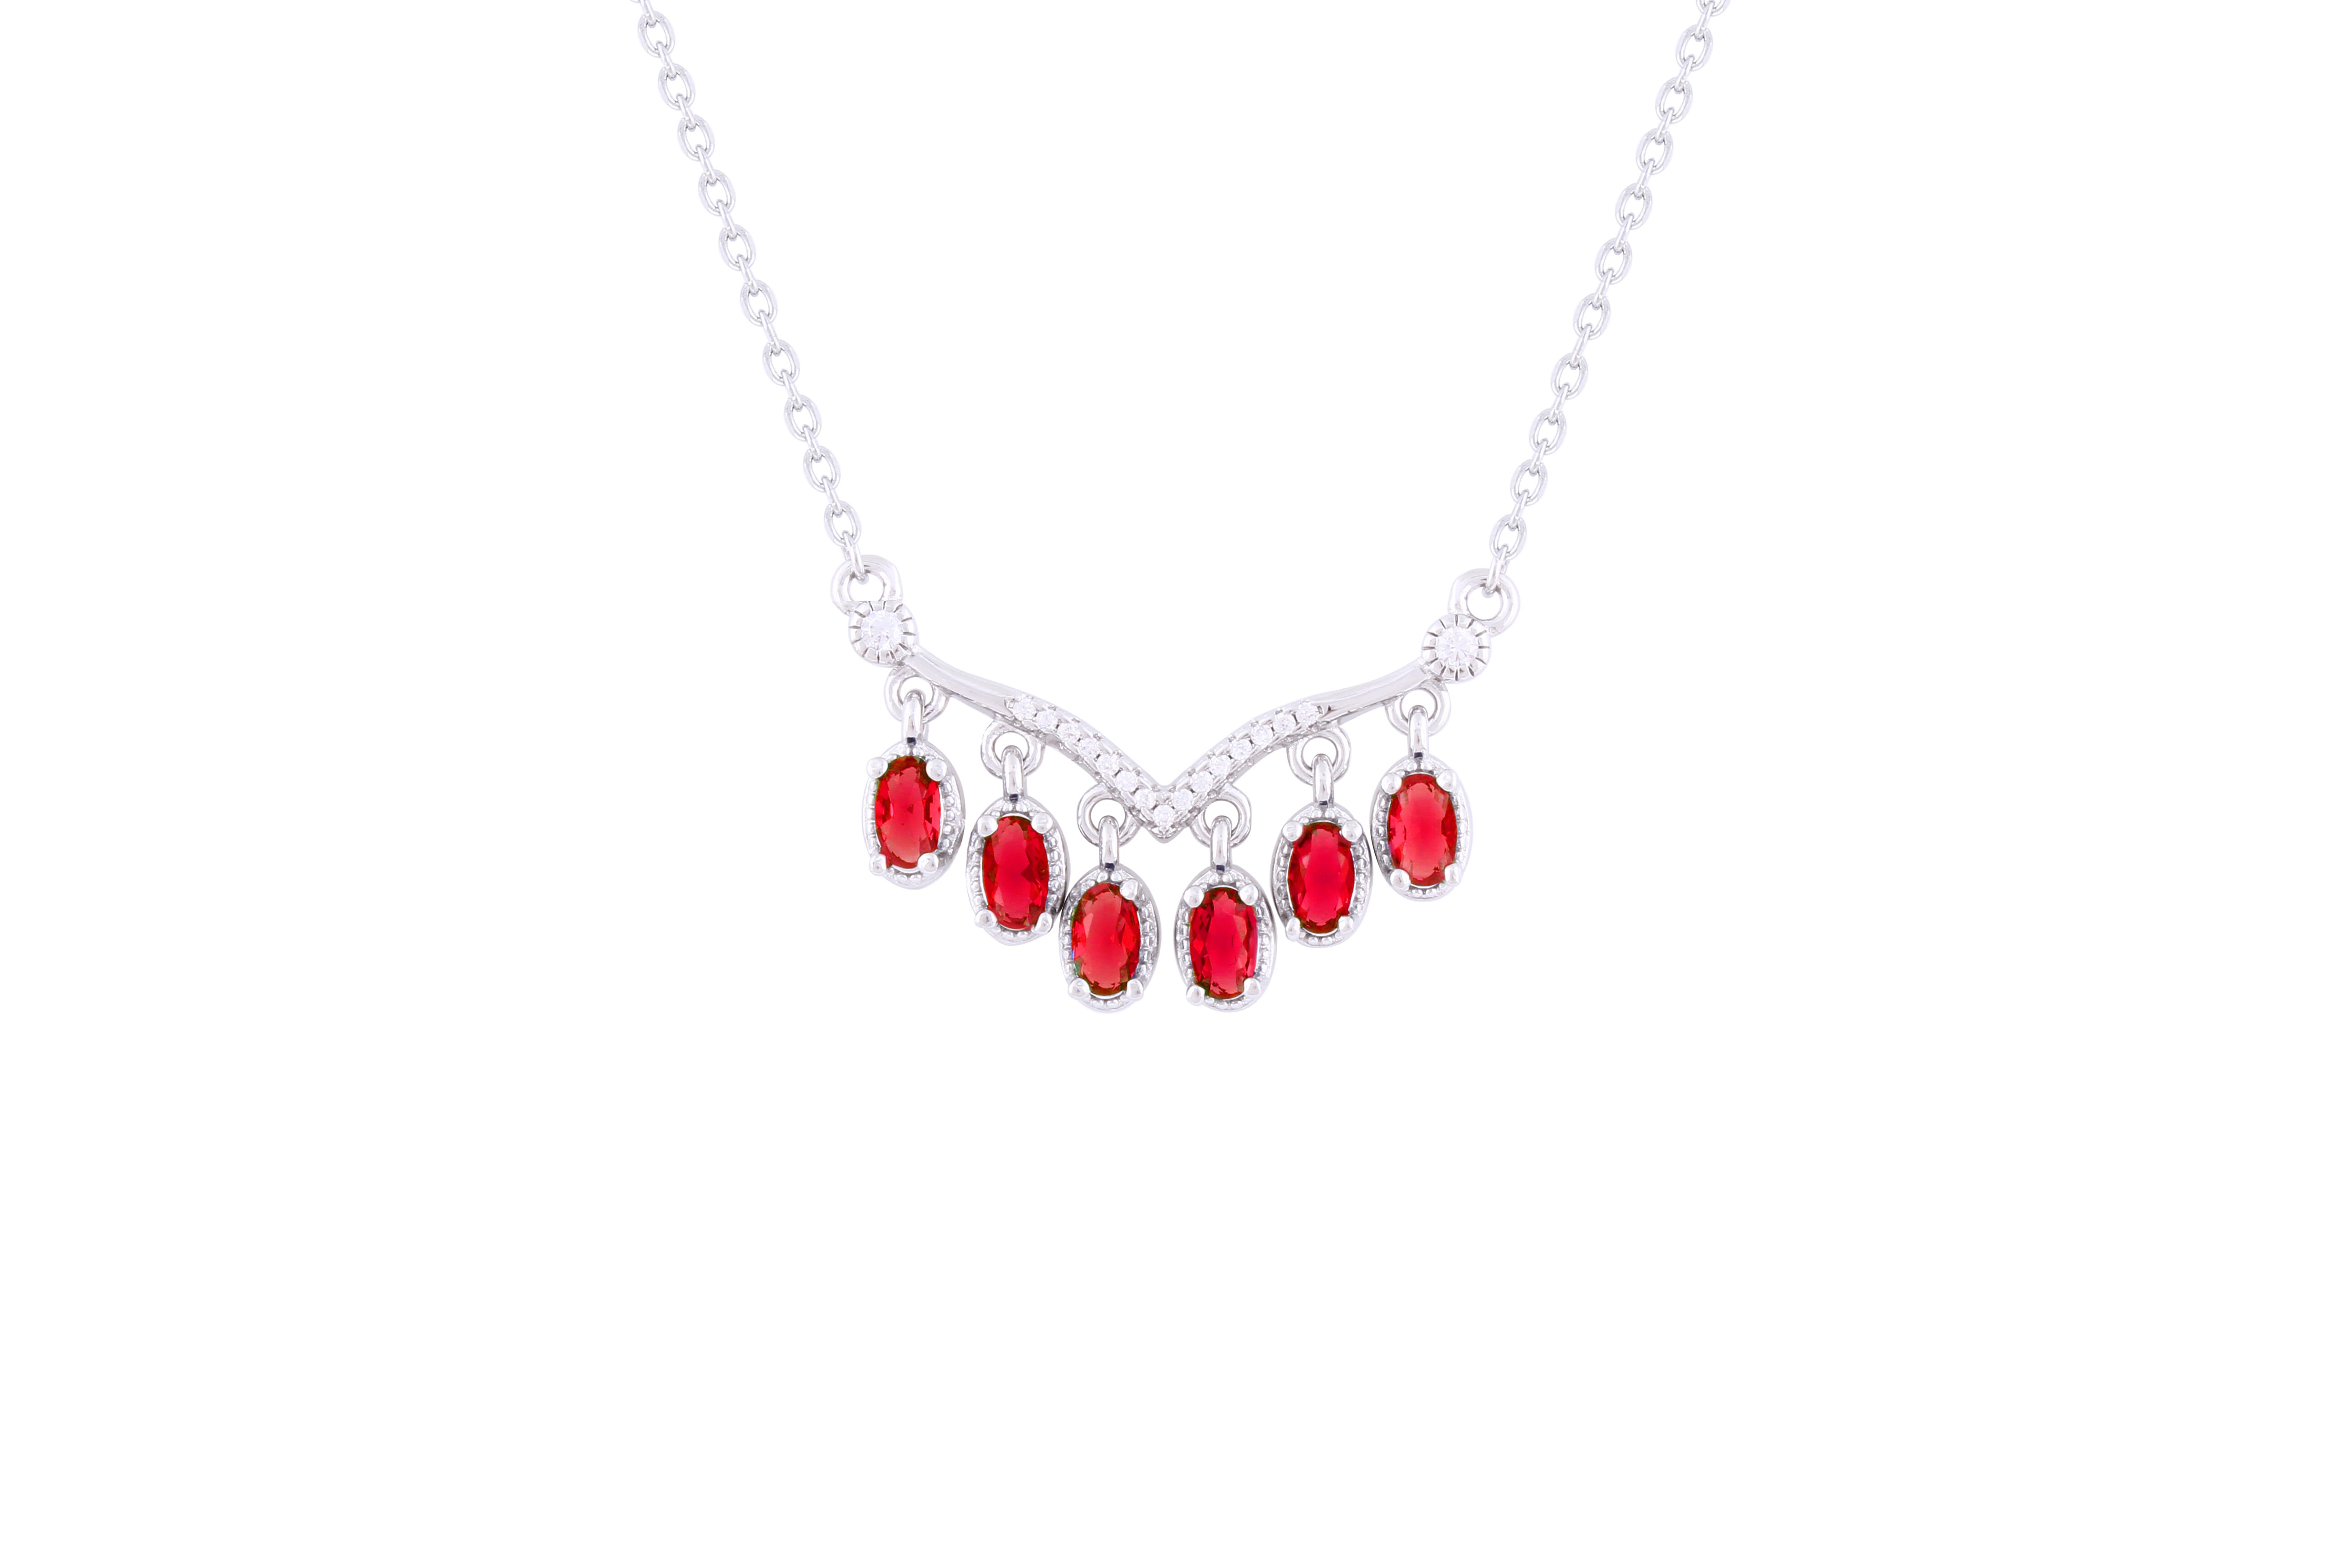 Asfour 925 Sterling Silver Necklace With Red Oval Cut Stones NR0495-R